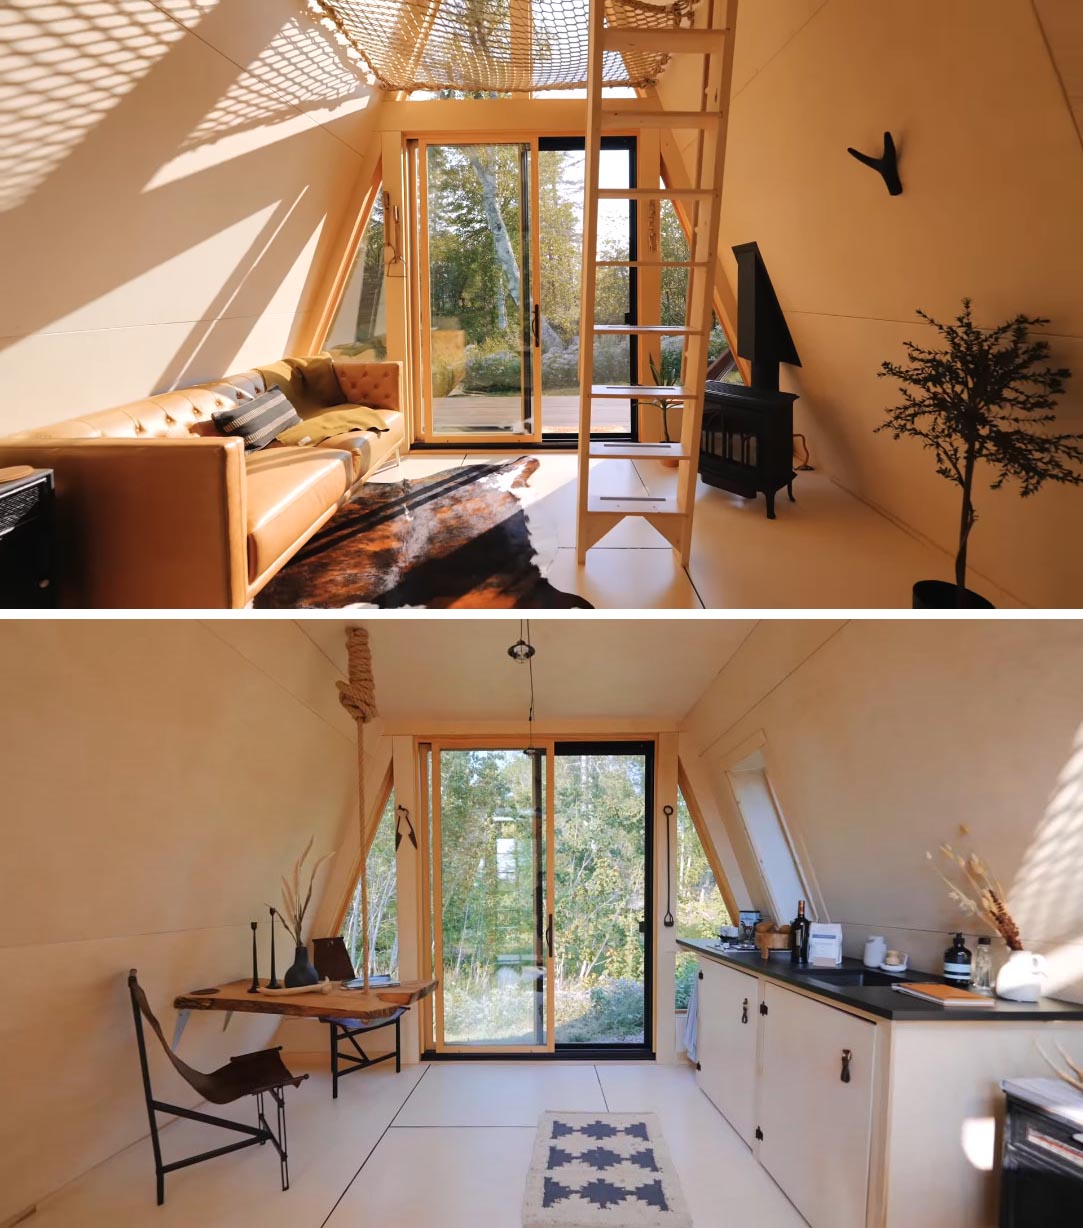 An A-frame cabin with a living room, fireplace, live edge wood dining table and small kitchen.